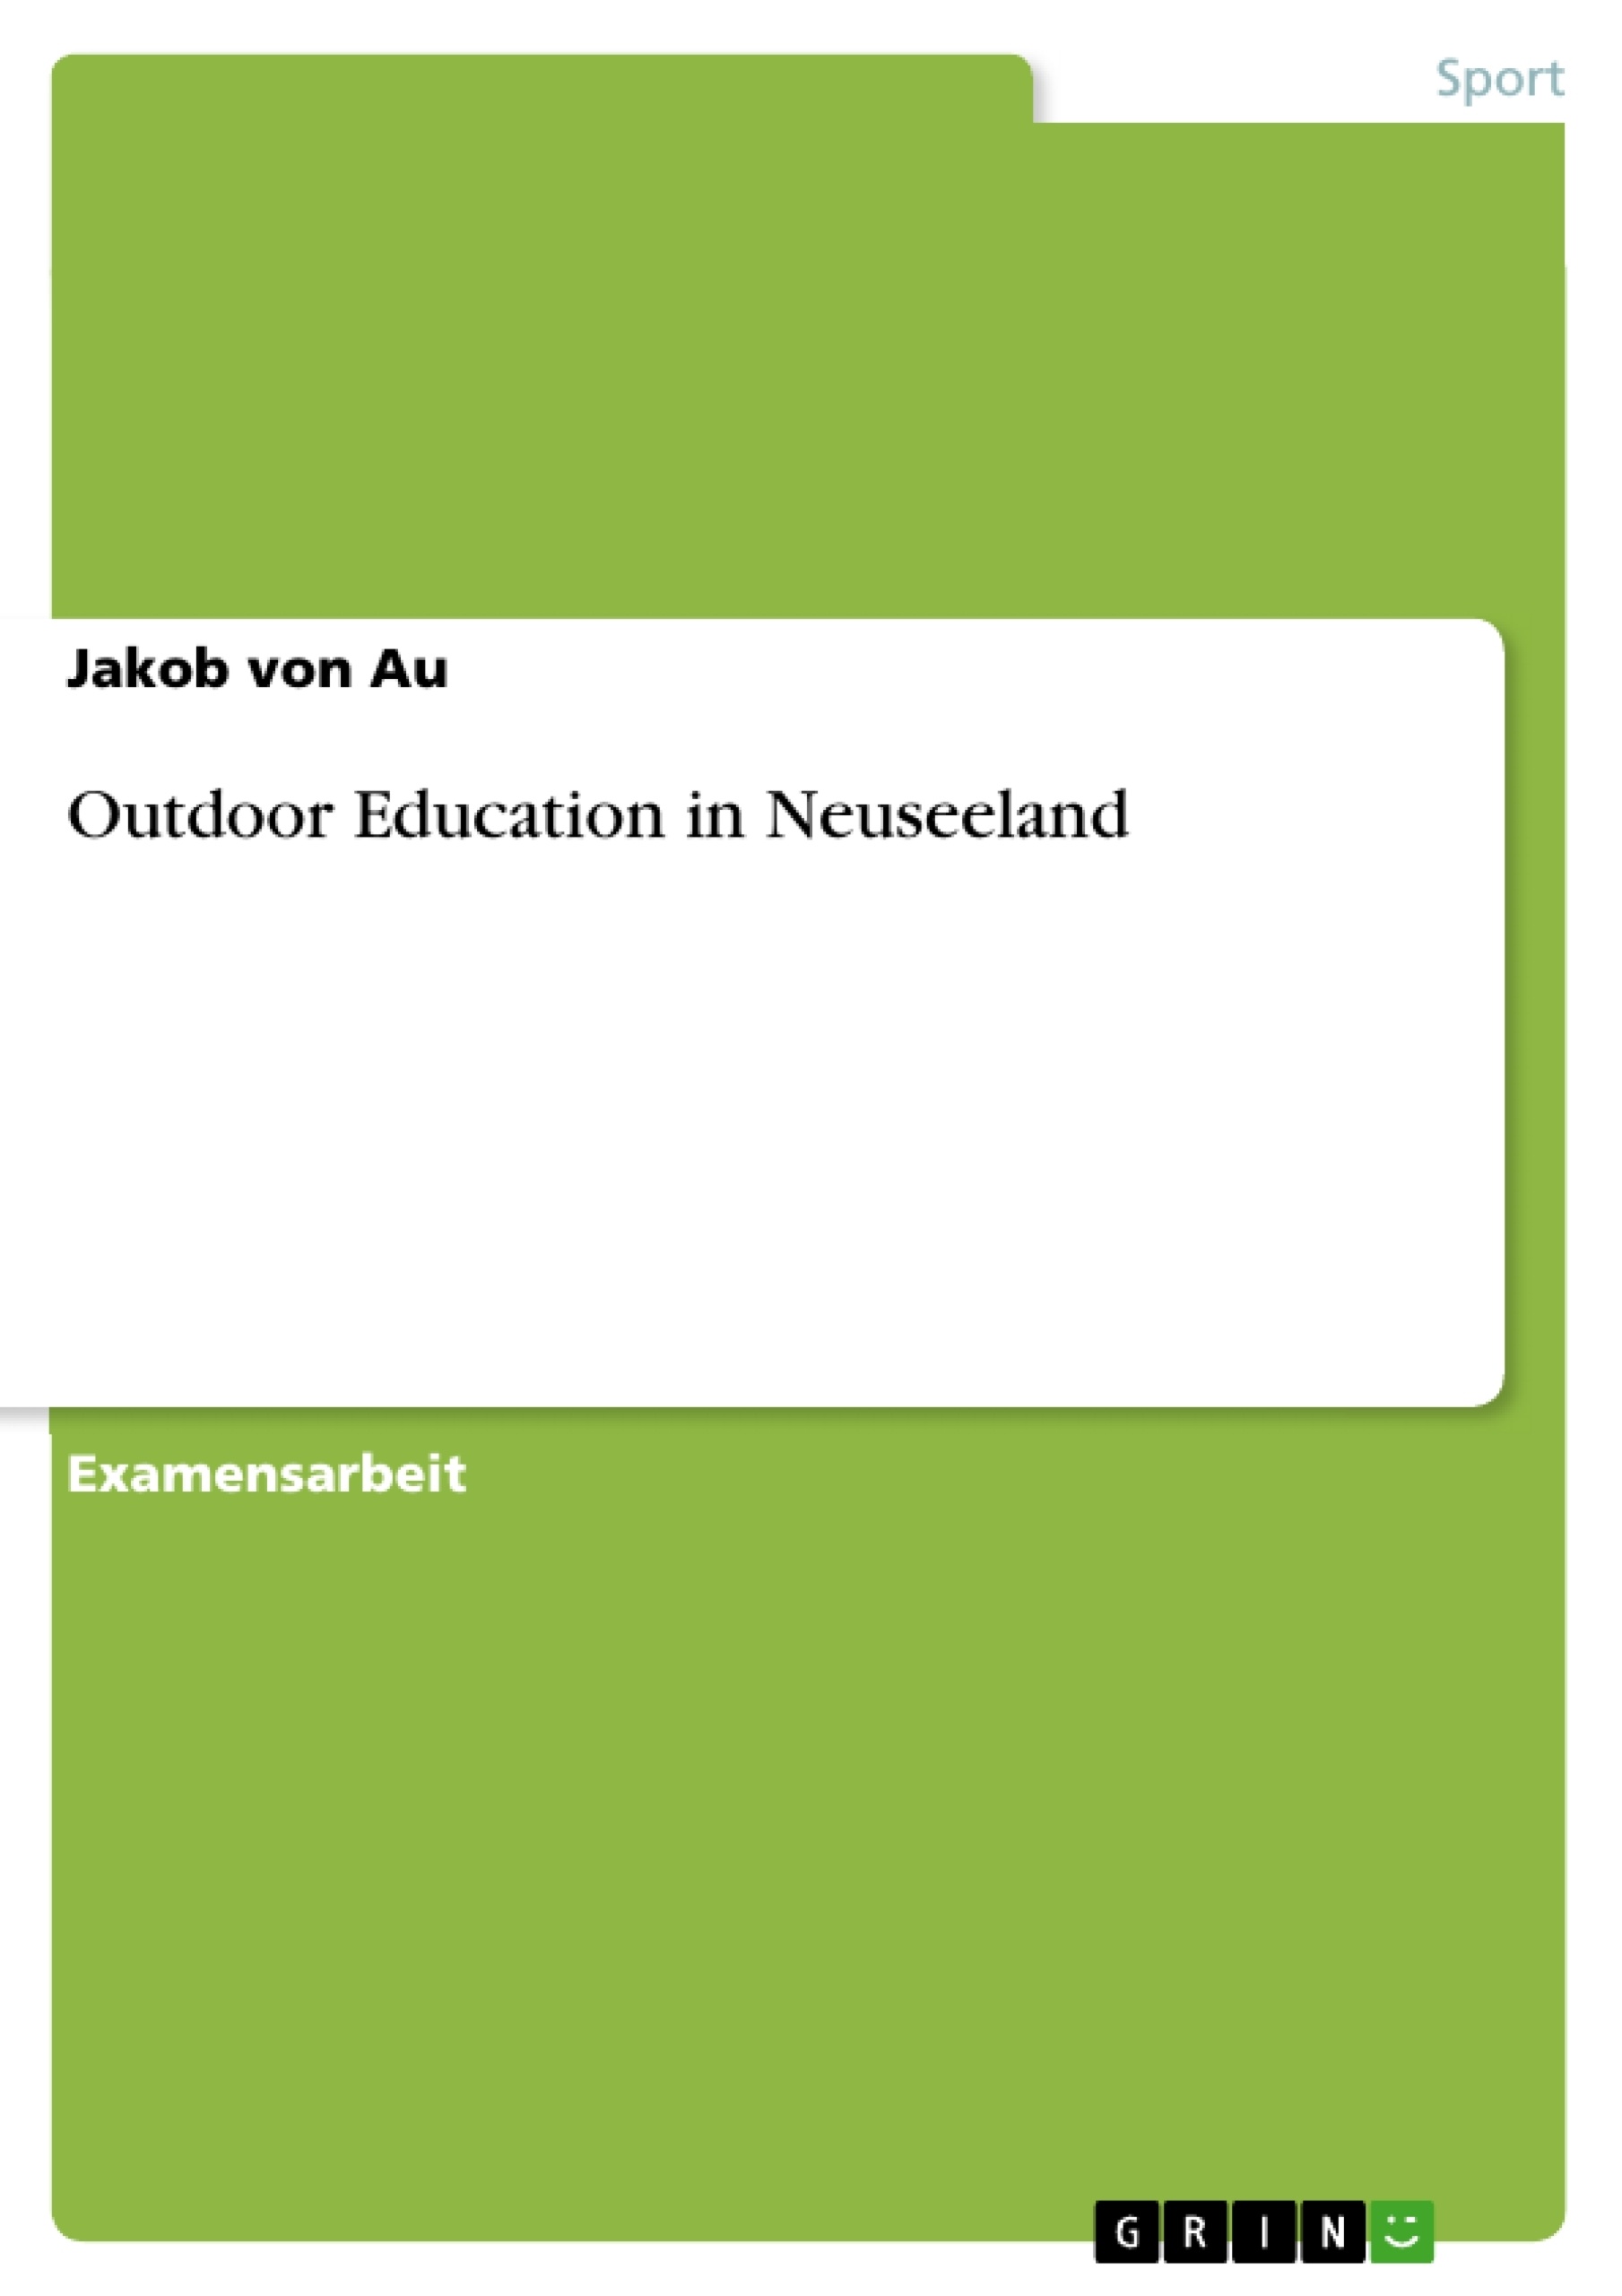 Title: Outdoor Education in Neuseeland